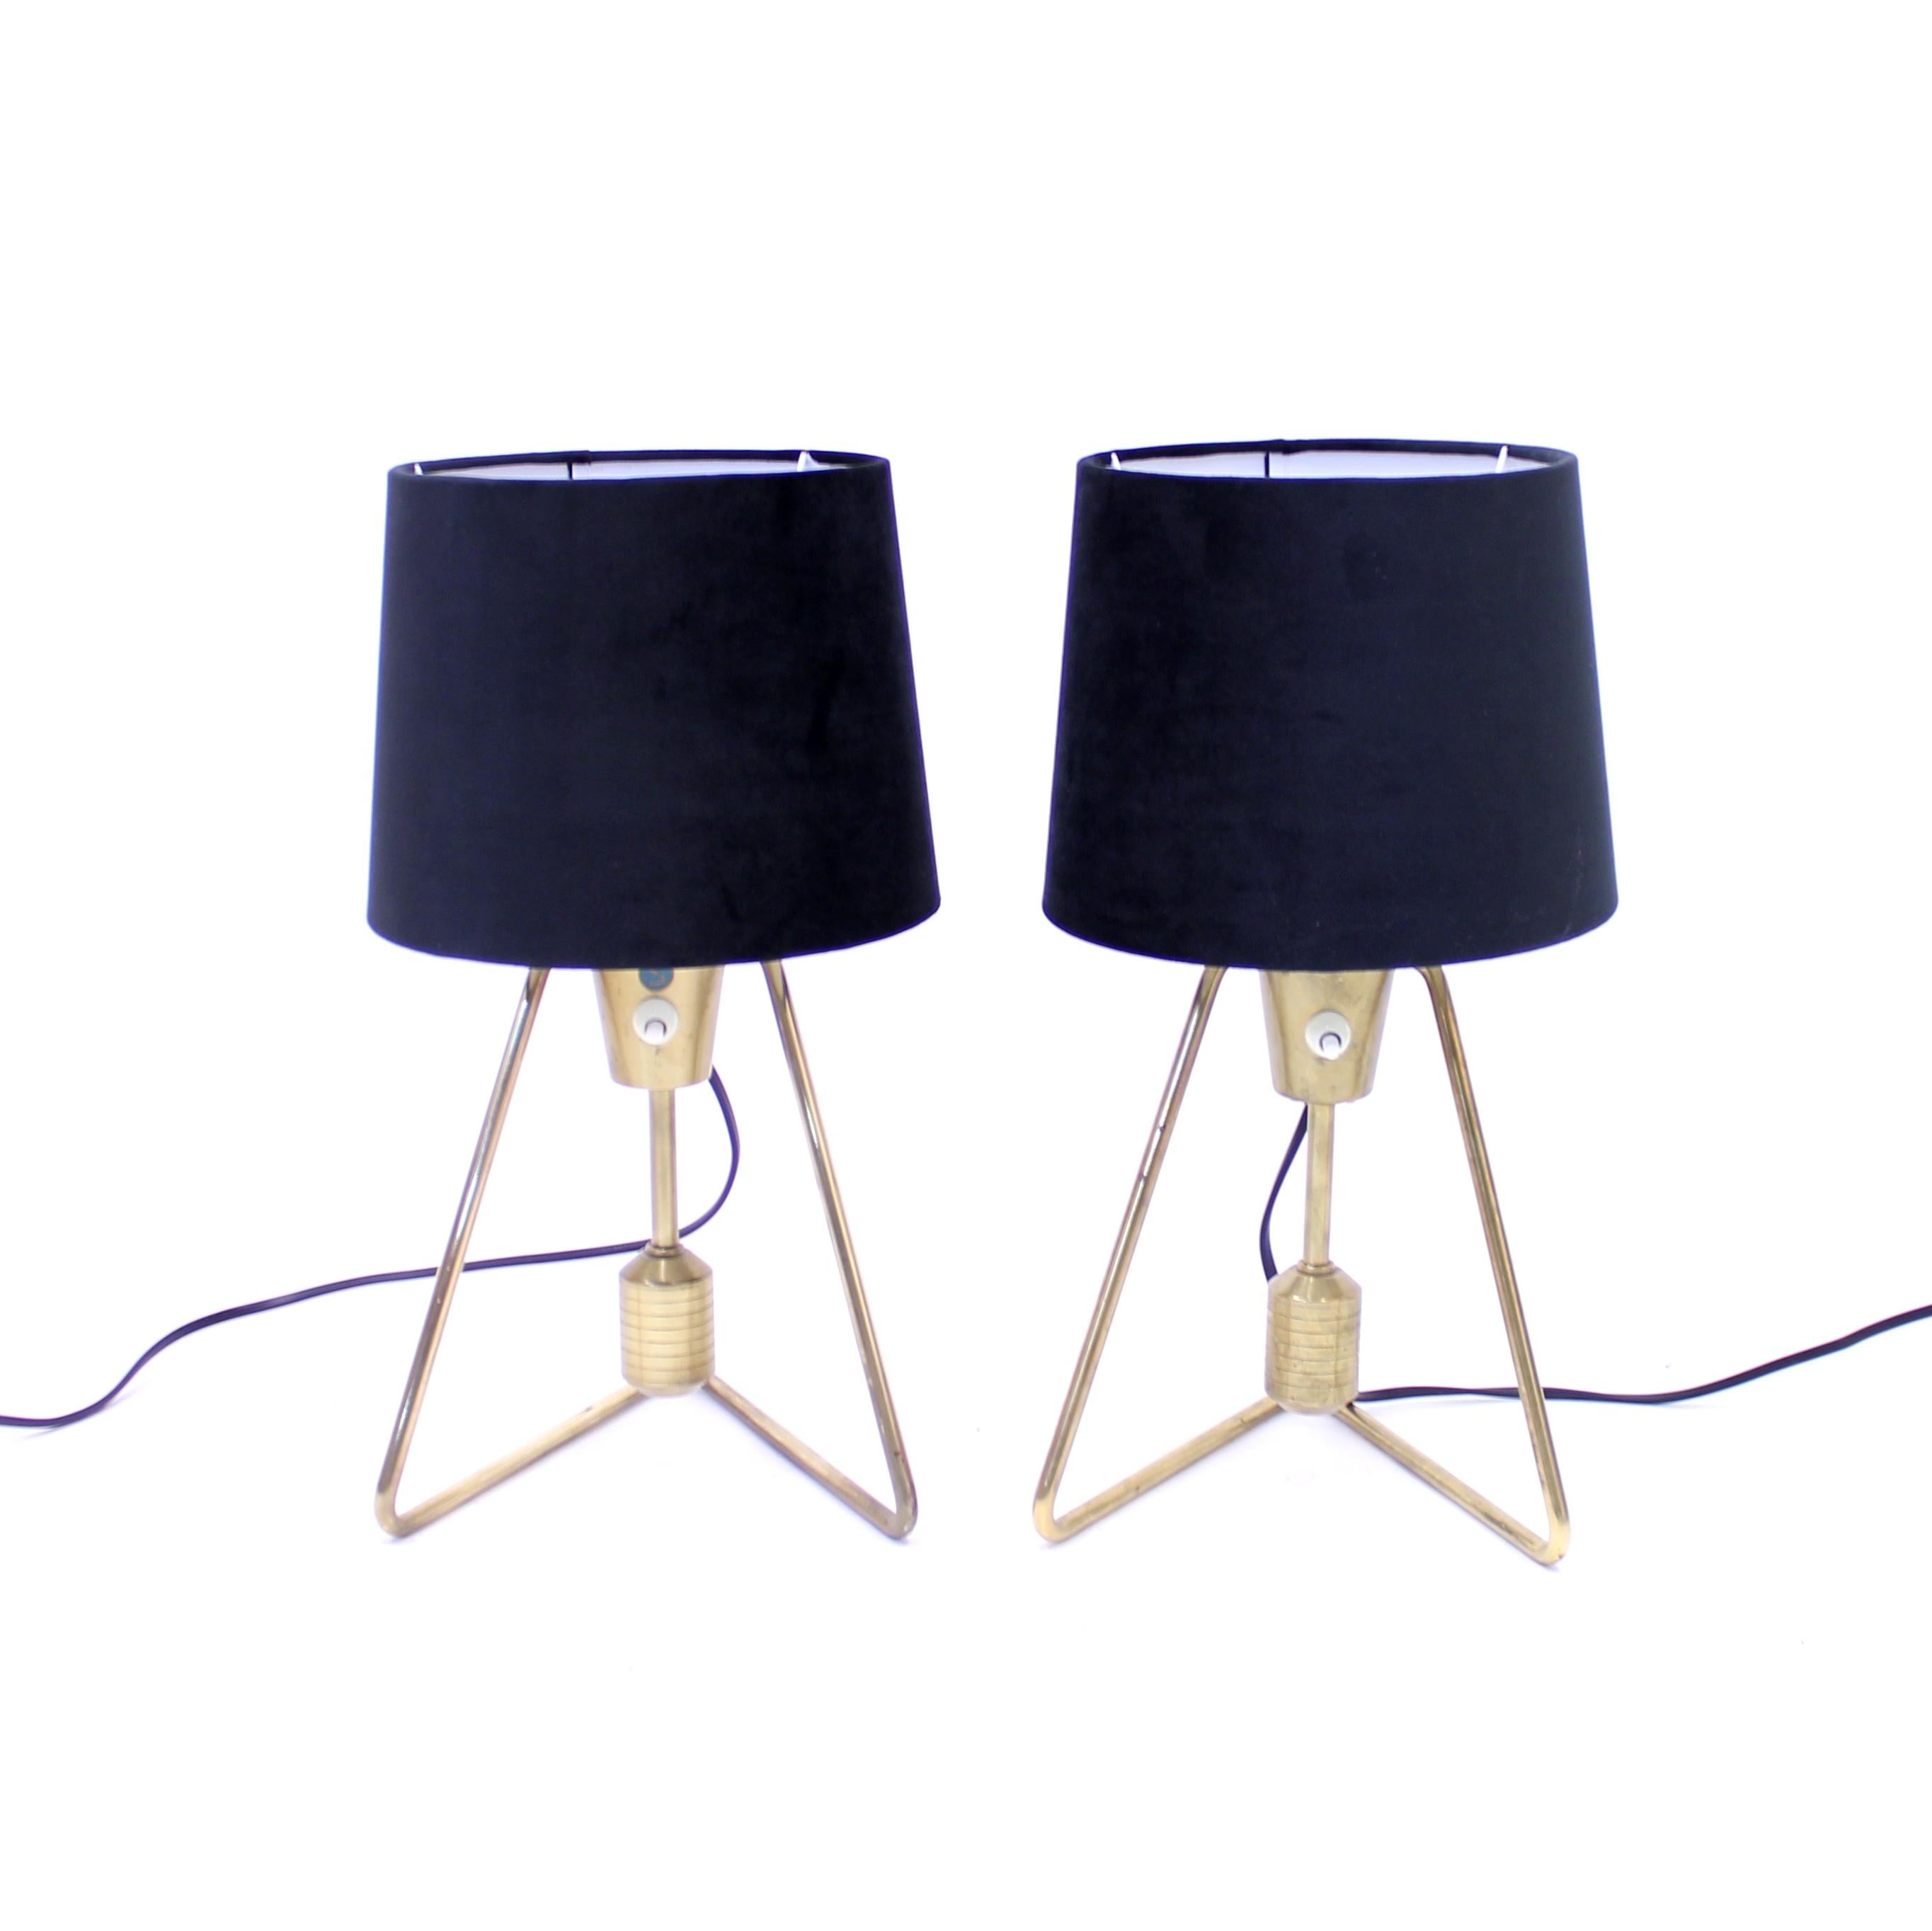 Scandinavian Modern Pair of ASEA Brass Table or Wall Lamps, 1950s